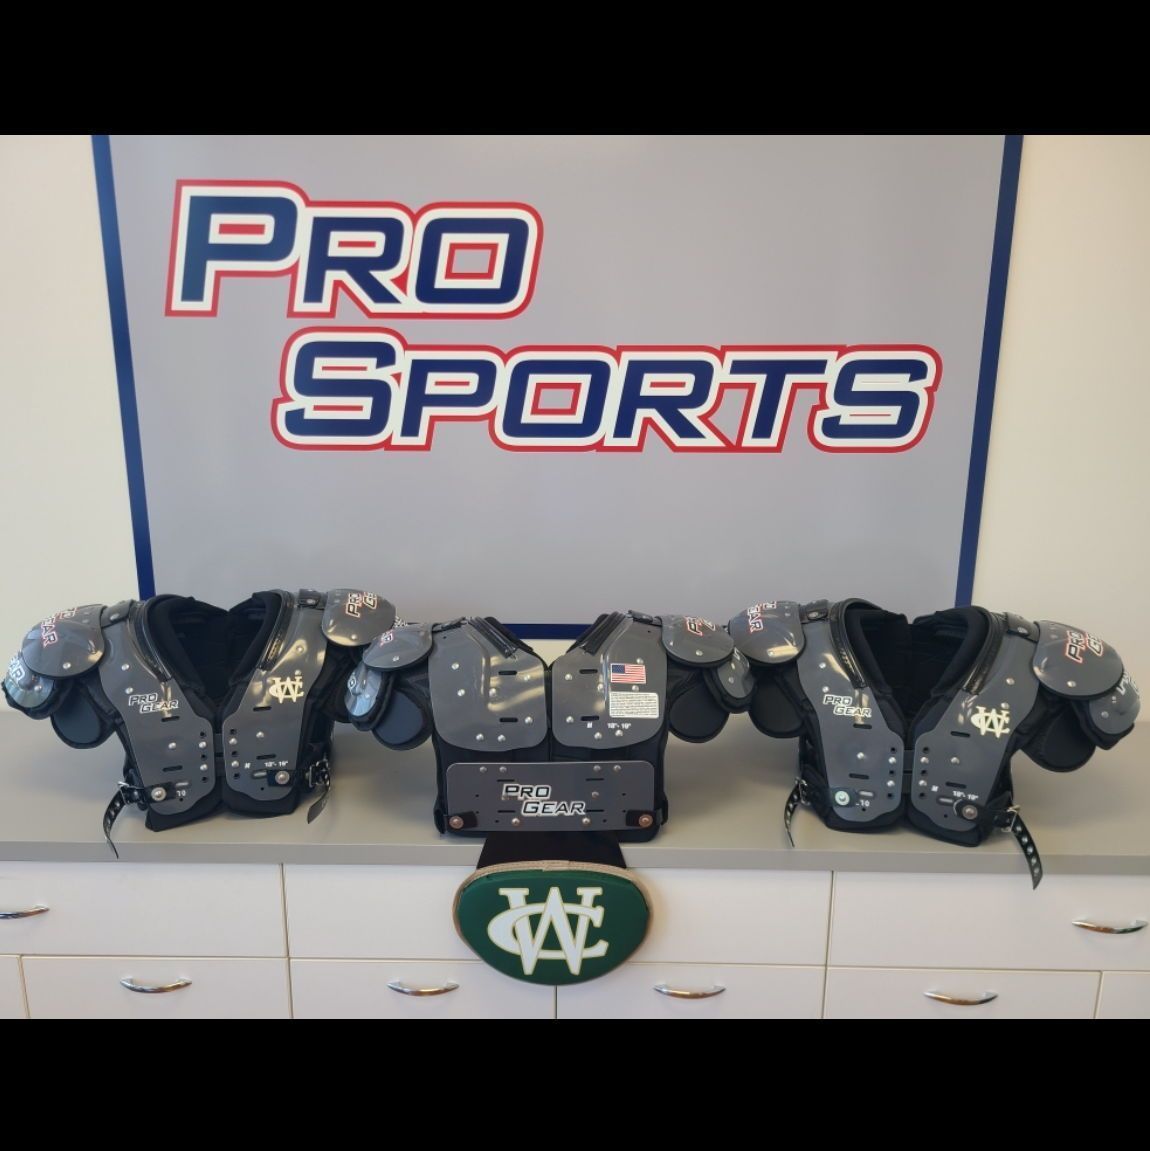 #beWARE, @WareFootball has #ProSportsCustoms on the way!🐊🔥

Big thanks to Coach Jason Strickland (@coachstrick20) for trusting Mike Nelson (@ProGearNellie) and our crew to protect his players!

@WareCoGators
@BakersSports

#KnowTheLogo #MadeInTheUSA #SportingGoods #FeedingTime